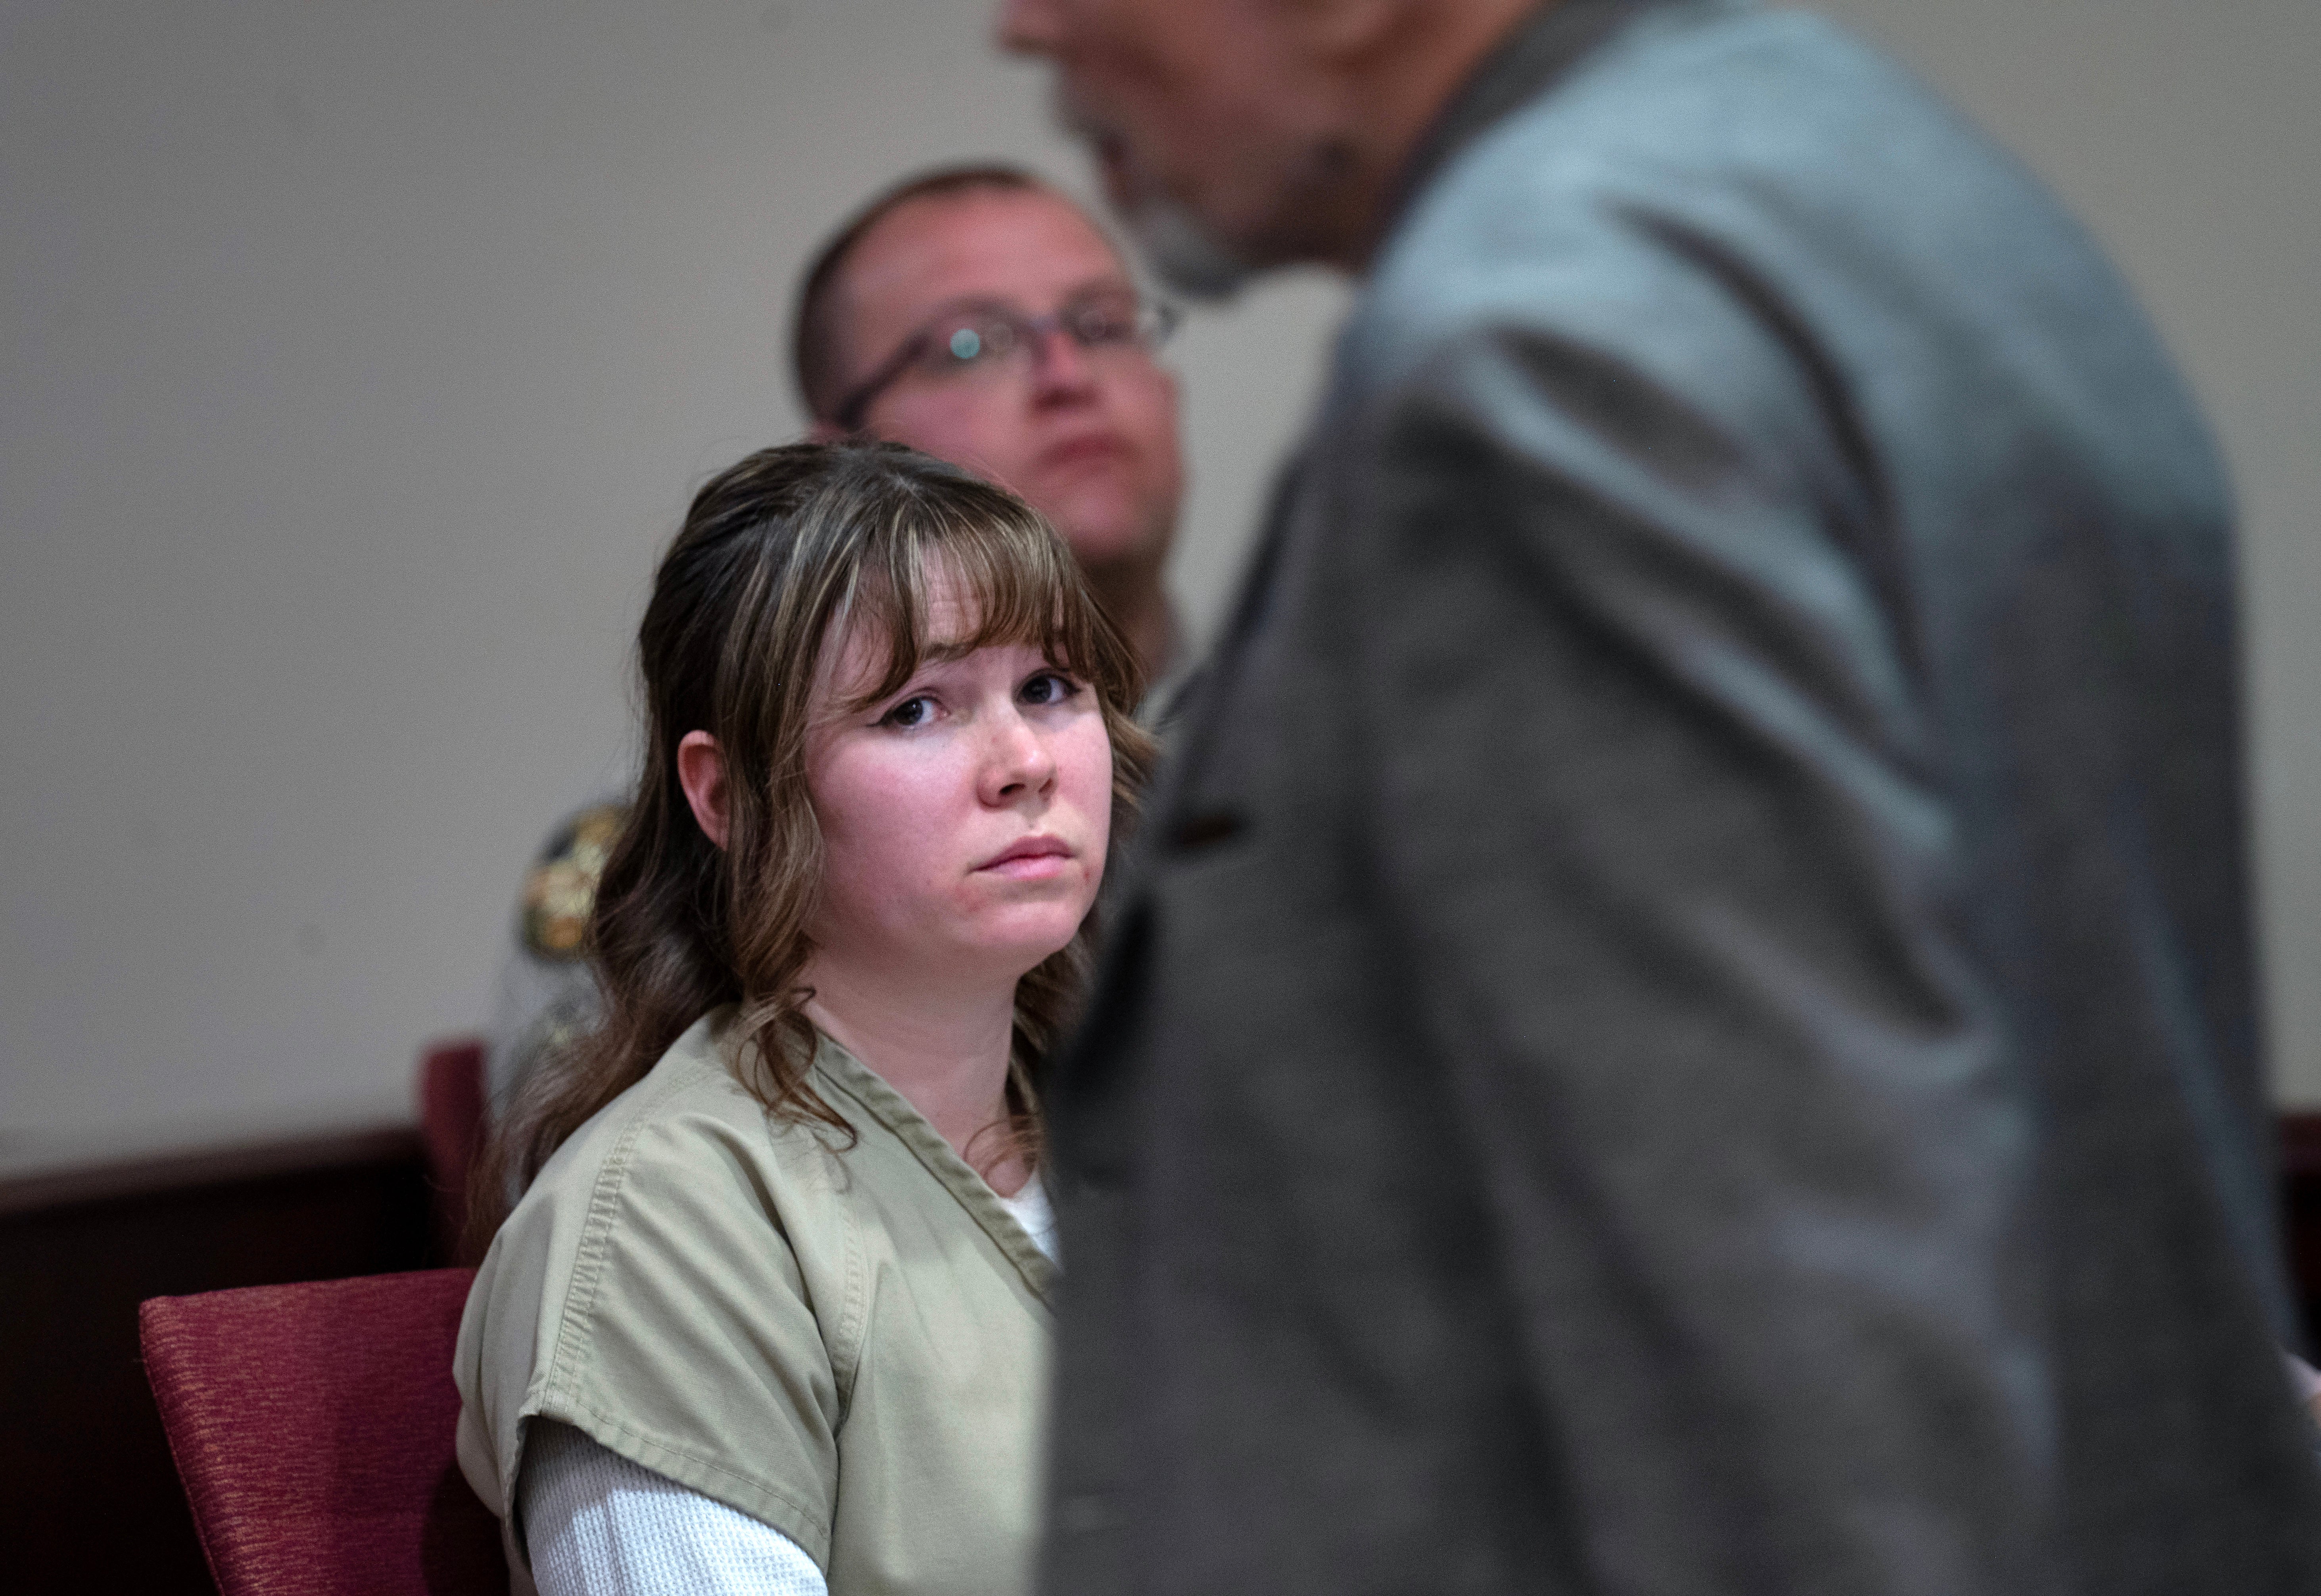 Hannah Gutierrez Reed watches her father Thell Reed leave the podium after he asked the judge not to impose prison time on his daughter in First District Court on 15 April 2024, in Santa Fe, New Mexico